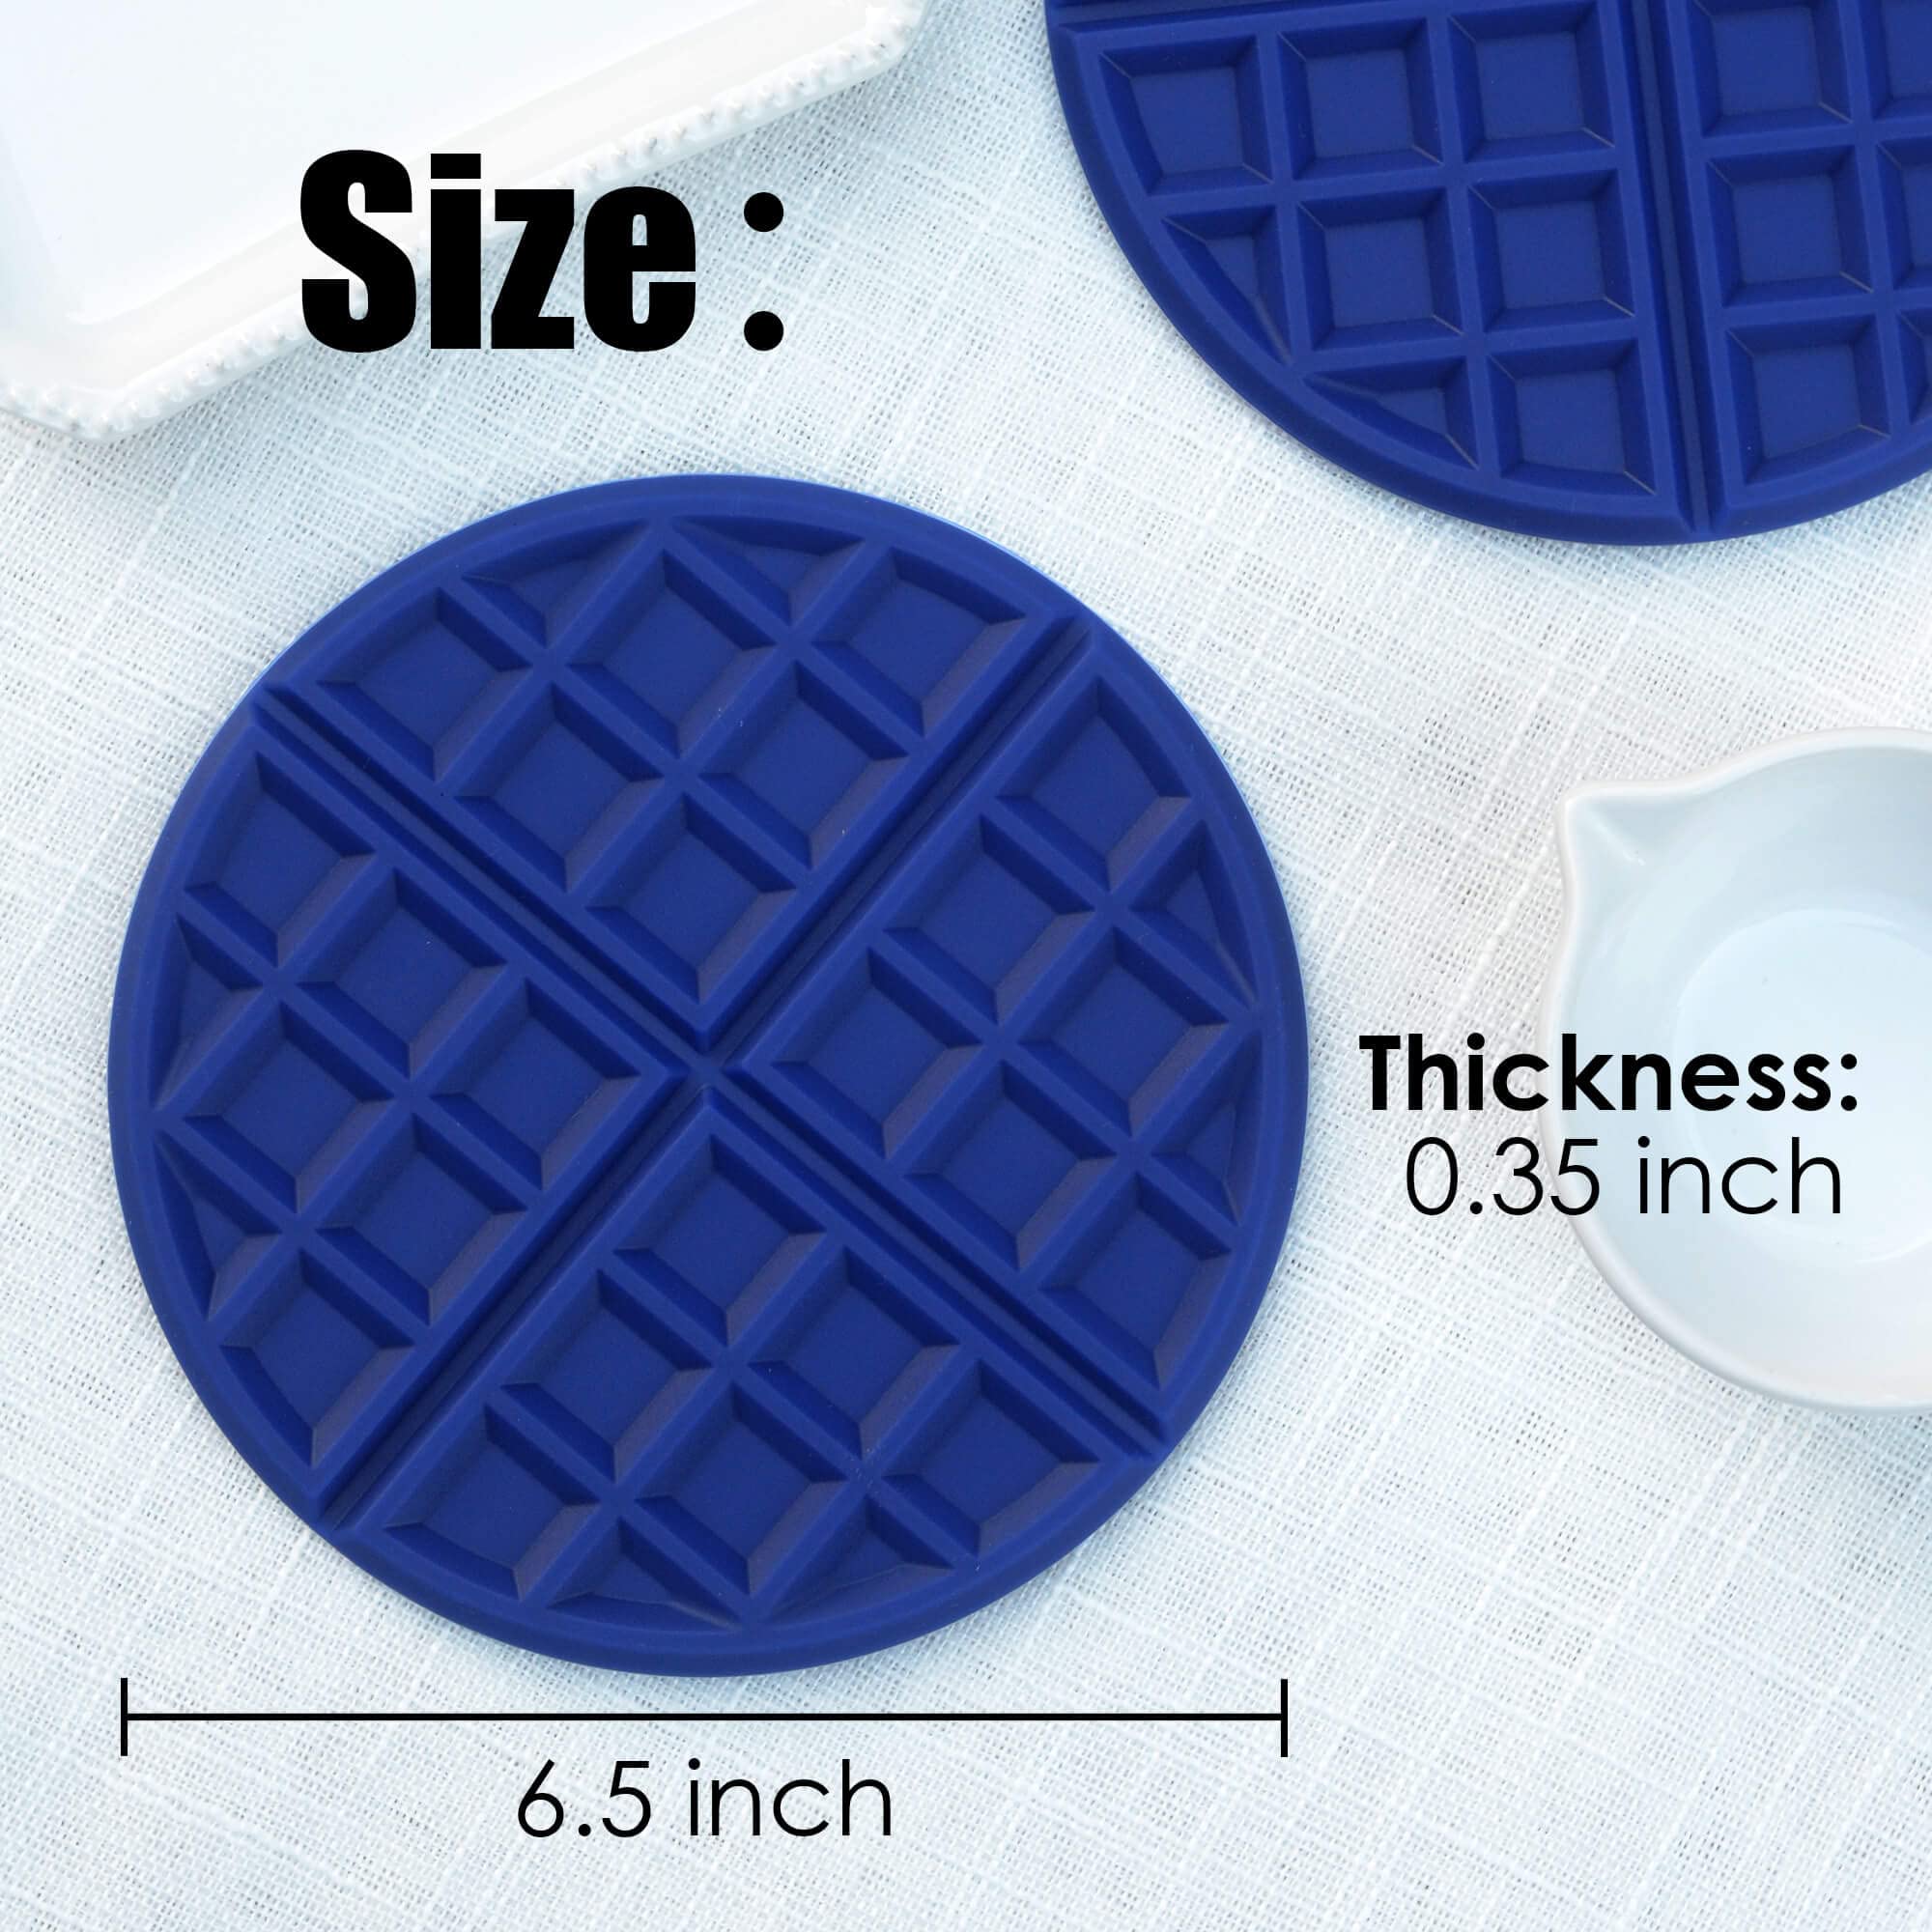 Kaiihome Silicone Kitchen Trivets Pot Holders Round Waffle Hot Pads Plate Holder – Set of 3 (Blue)